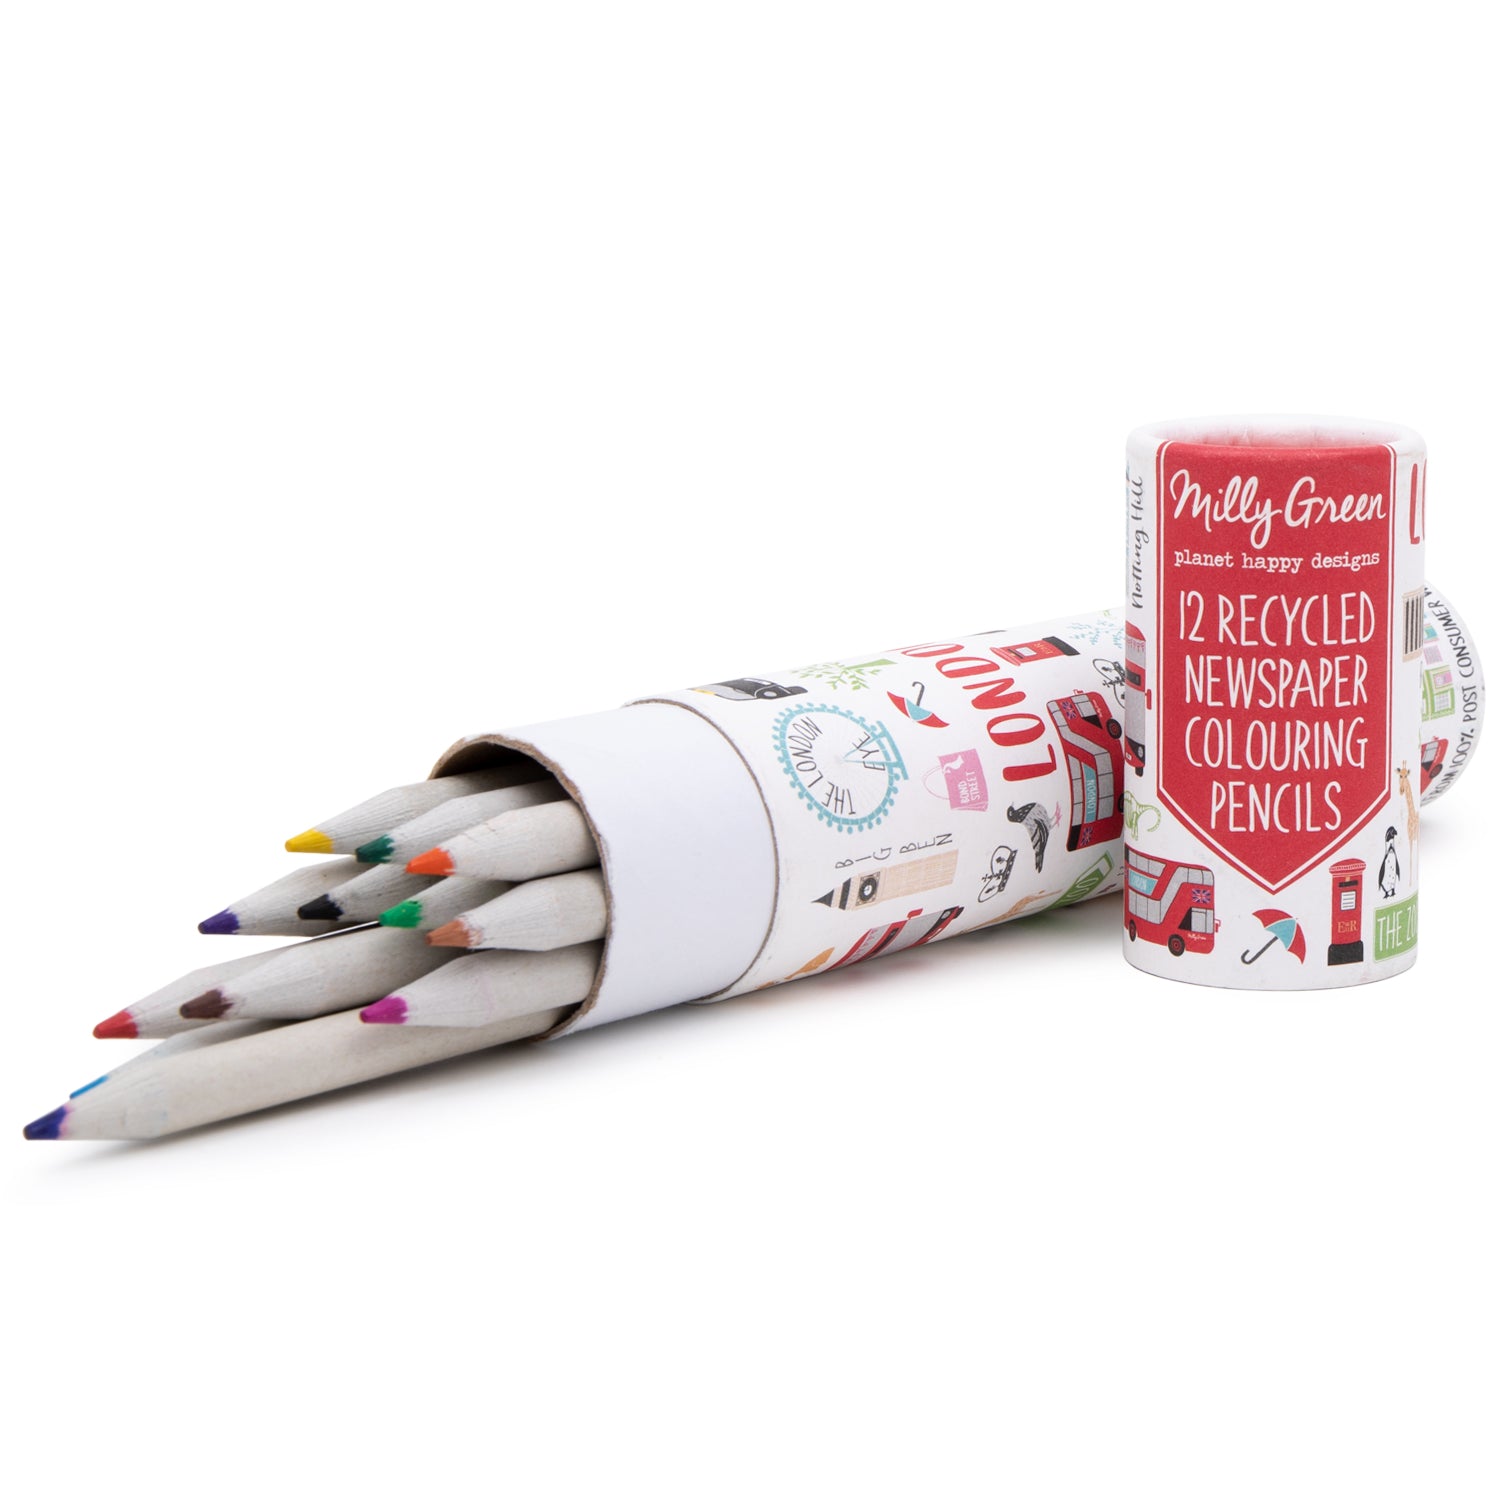 London Adventures Recycled Newspaper Colouring Pencils Set 1